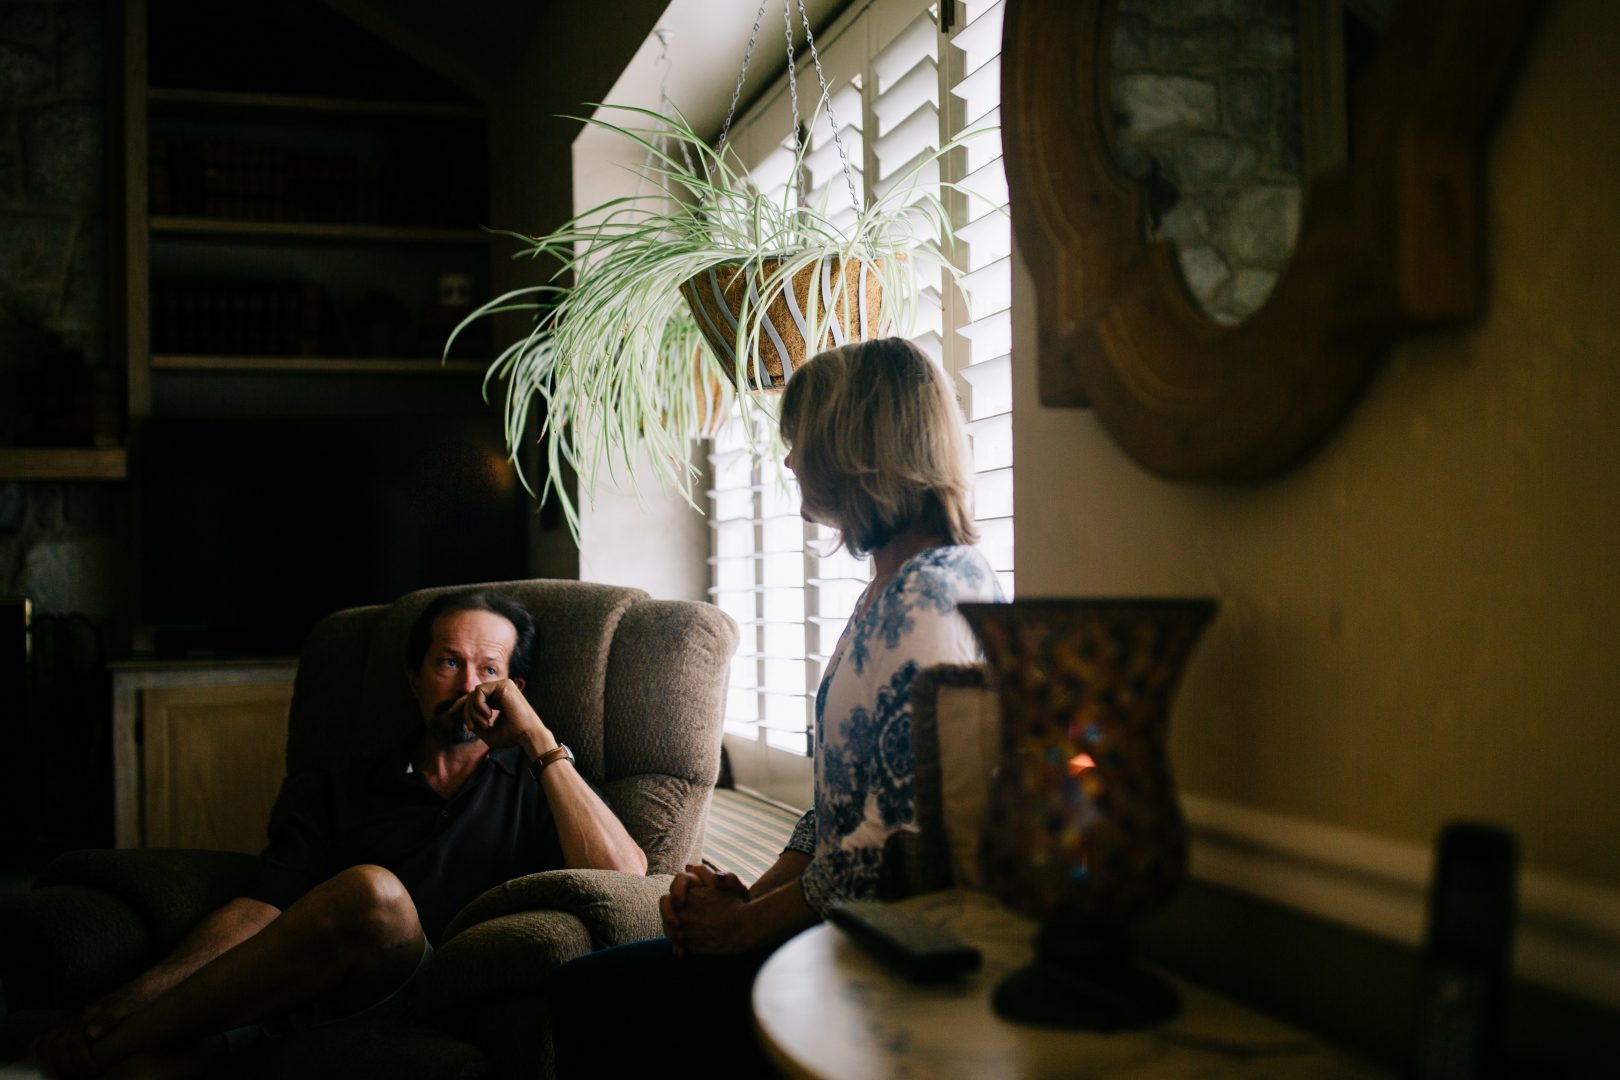 Paul and Martha Stringer reflect on their daughter Kimberly's struggle with mental illness in their Morrisville, Pa., home on Aug. 7, 2020.  